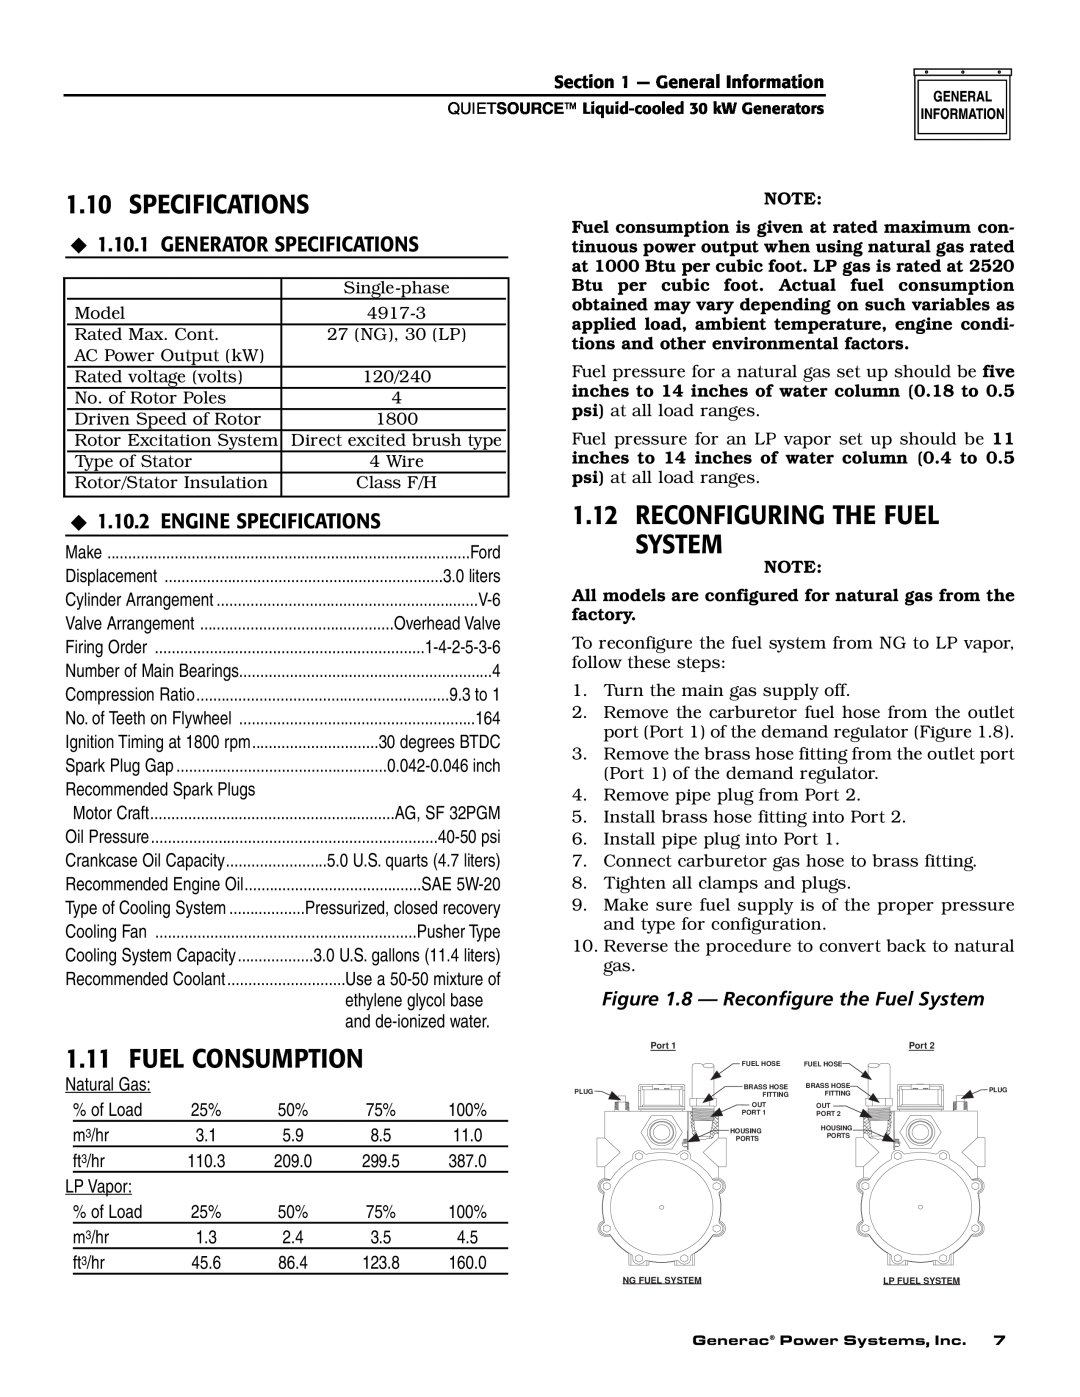 Generac Power Systems 004917-3 owner manual Specifications, Fuel Consumption, 1.12RECONFIGURING THE FUEL SYSTEM 